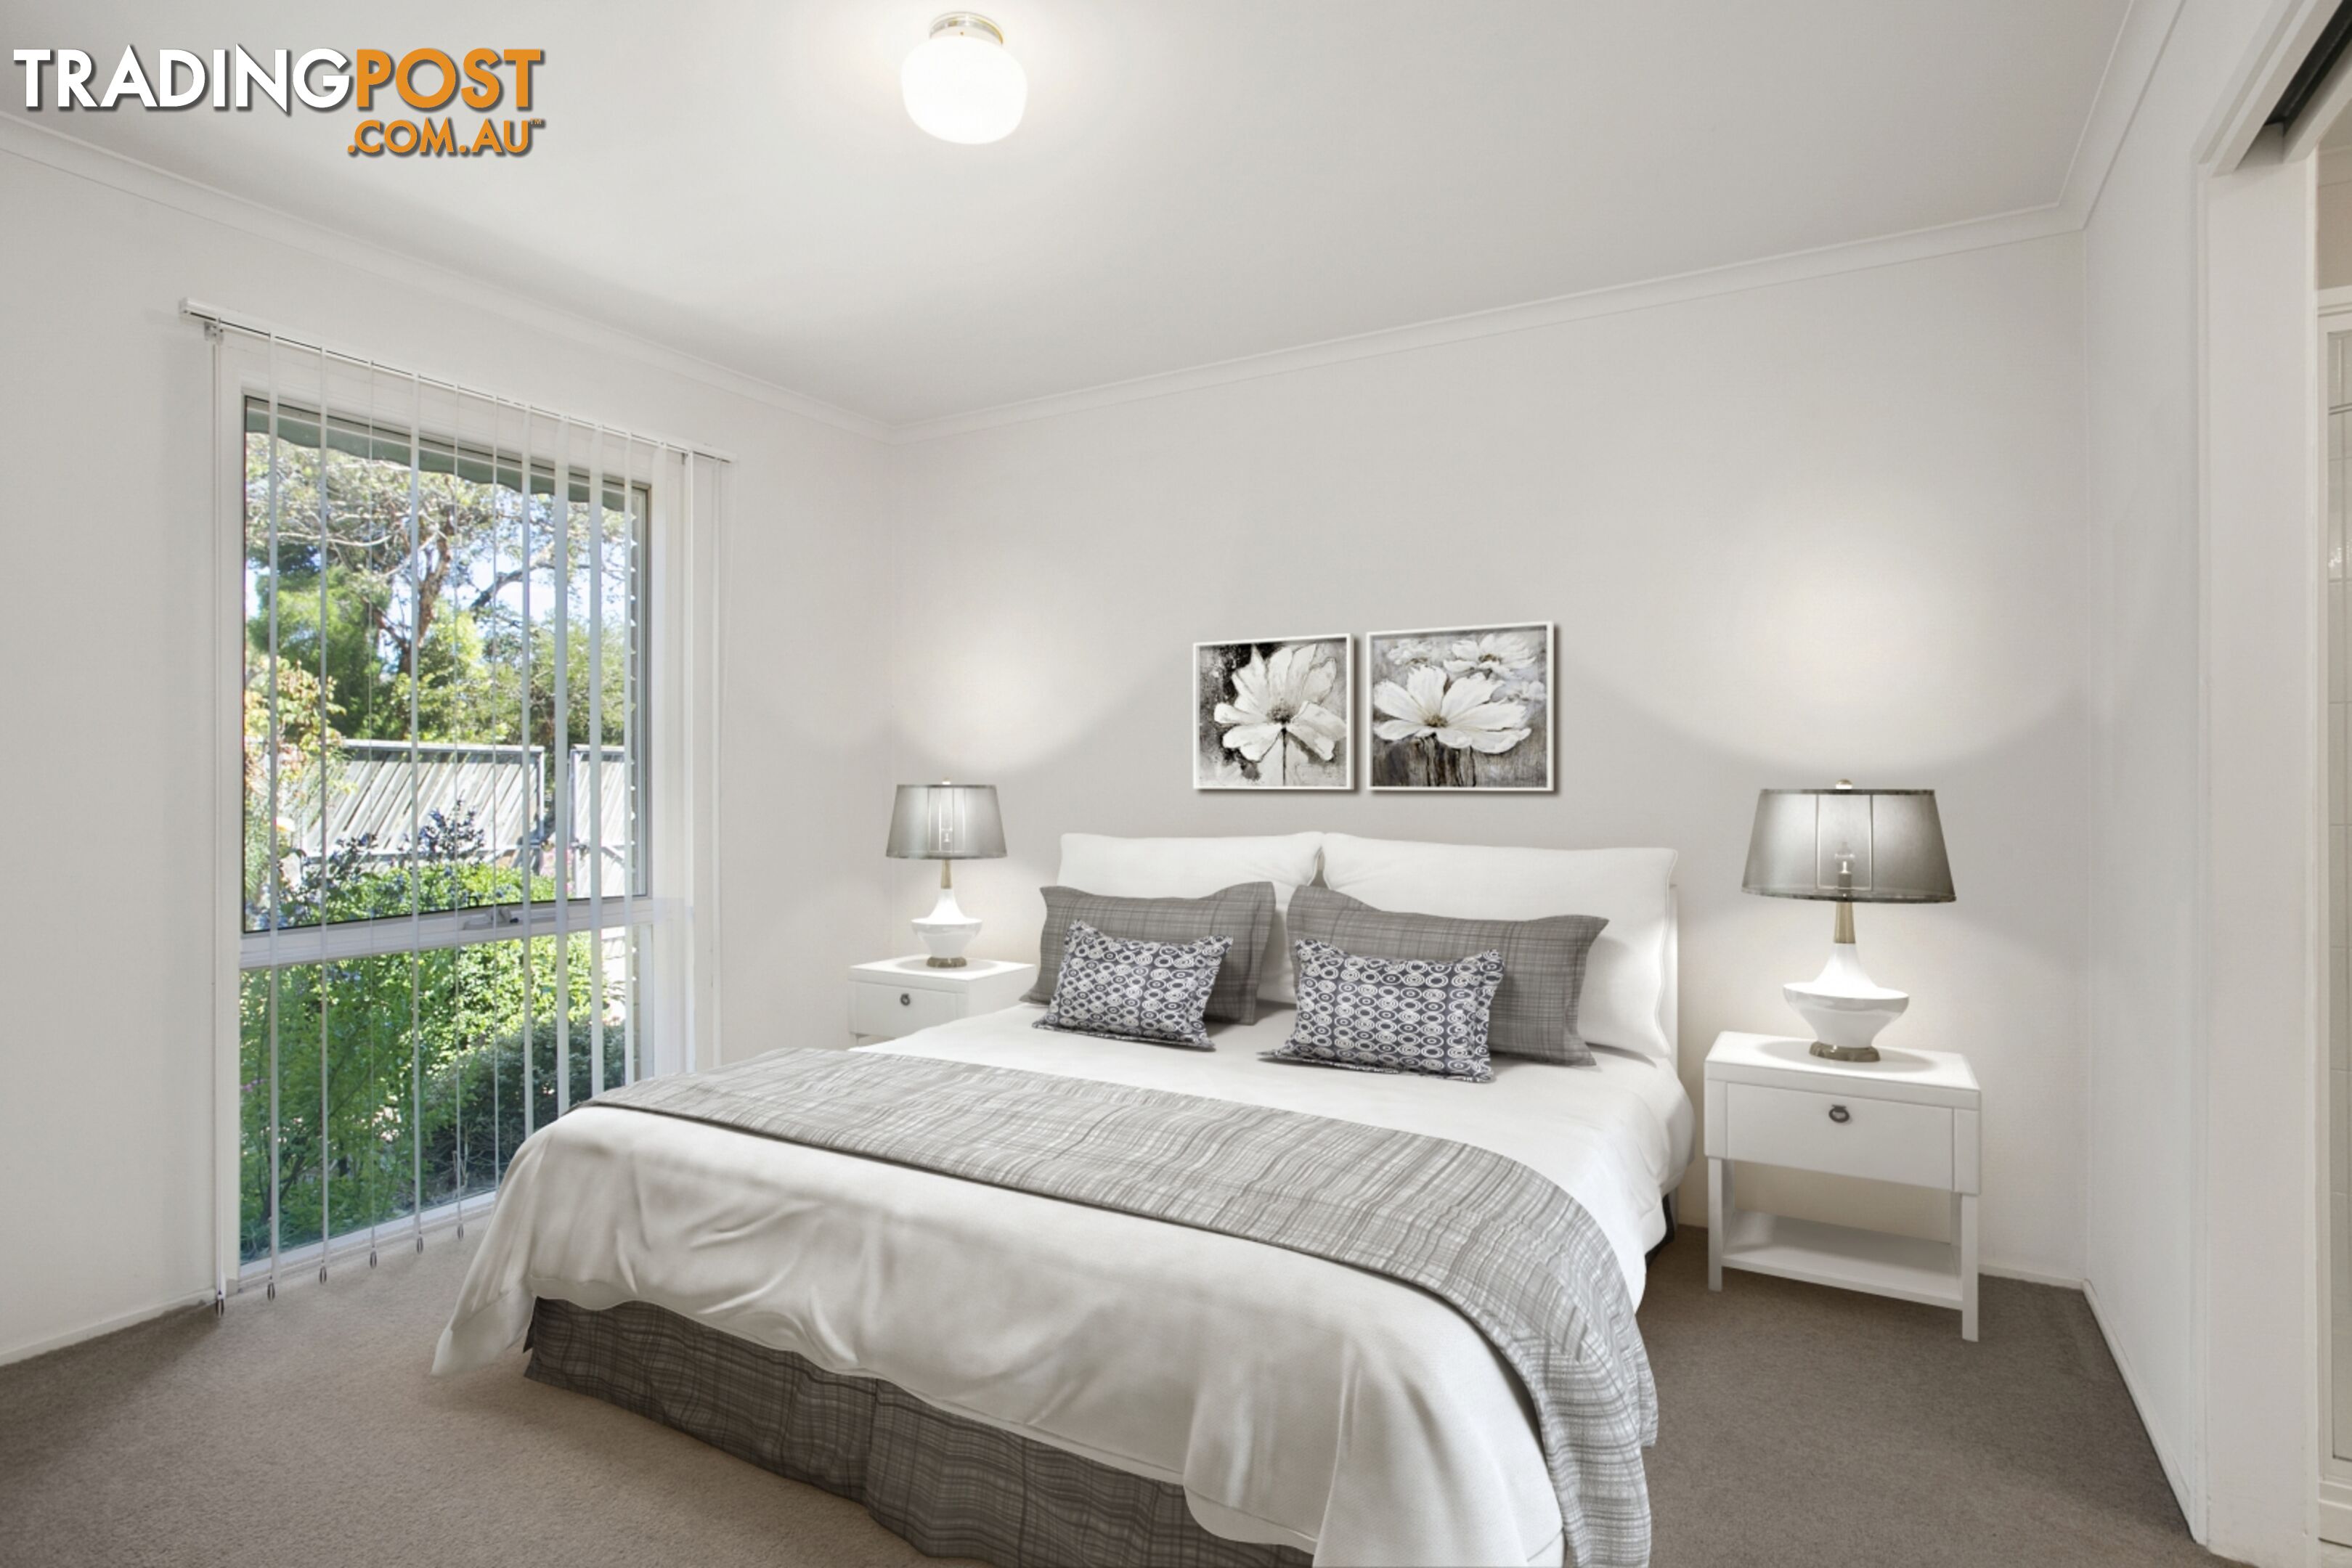 1 32-34 Lawrence  Road POINT LONSDALE VIC 3225